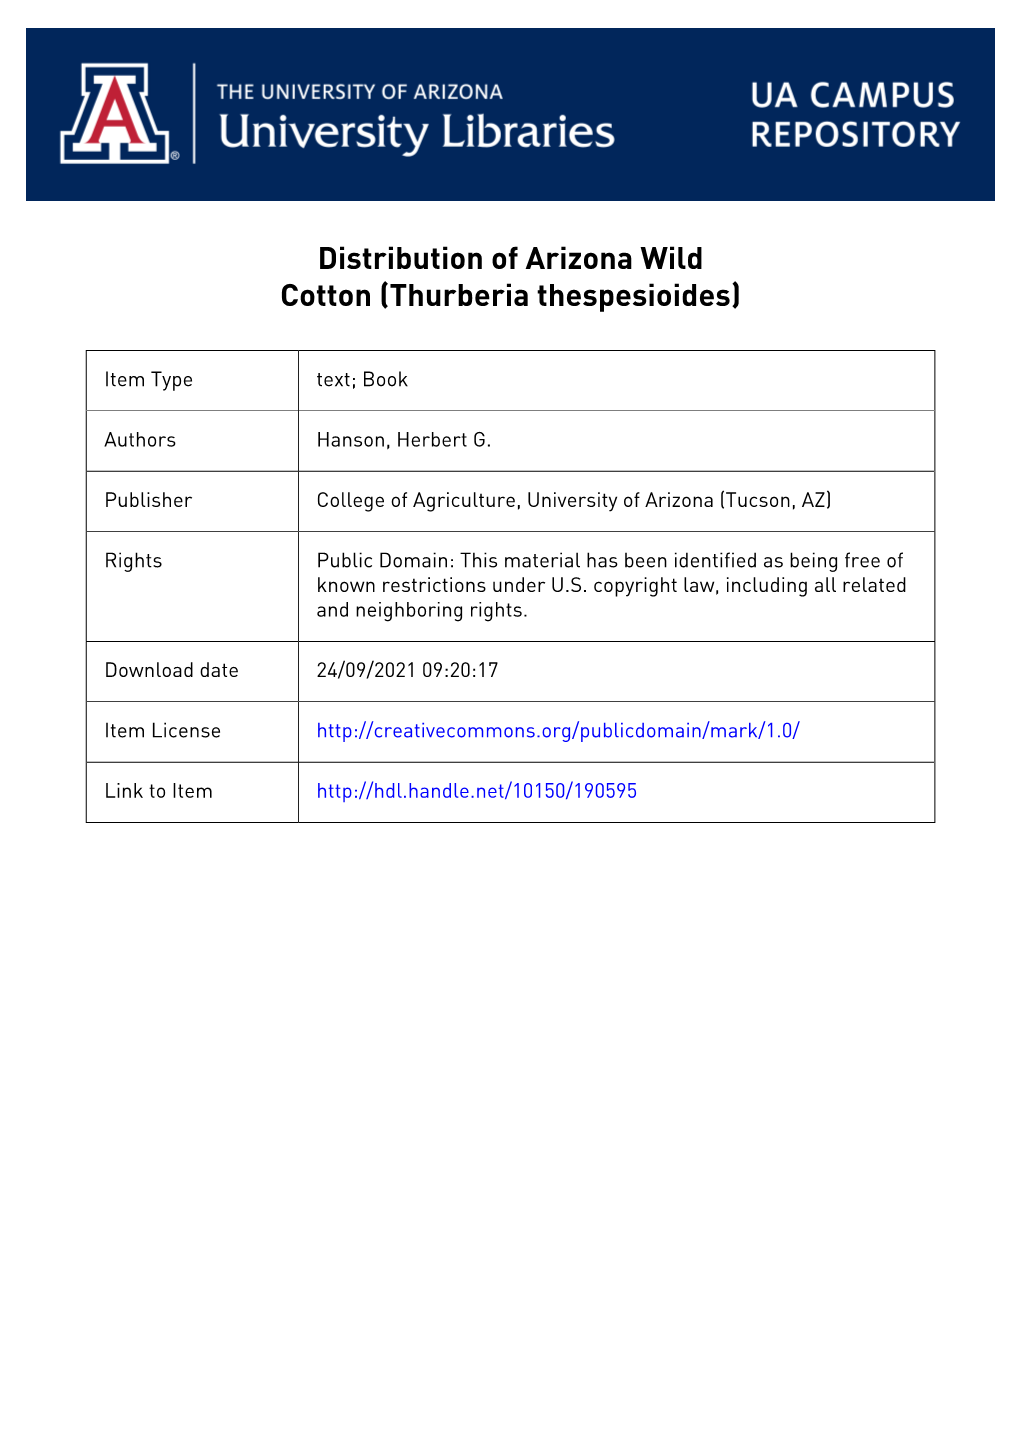 The University of Arizona Agricultural Experiment Station DISTRIBUTION